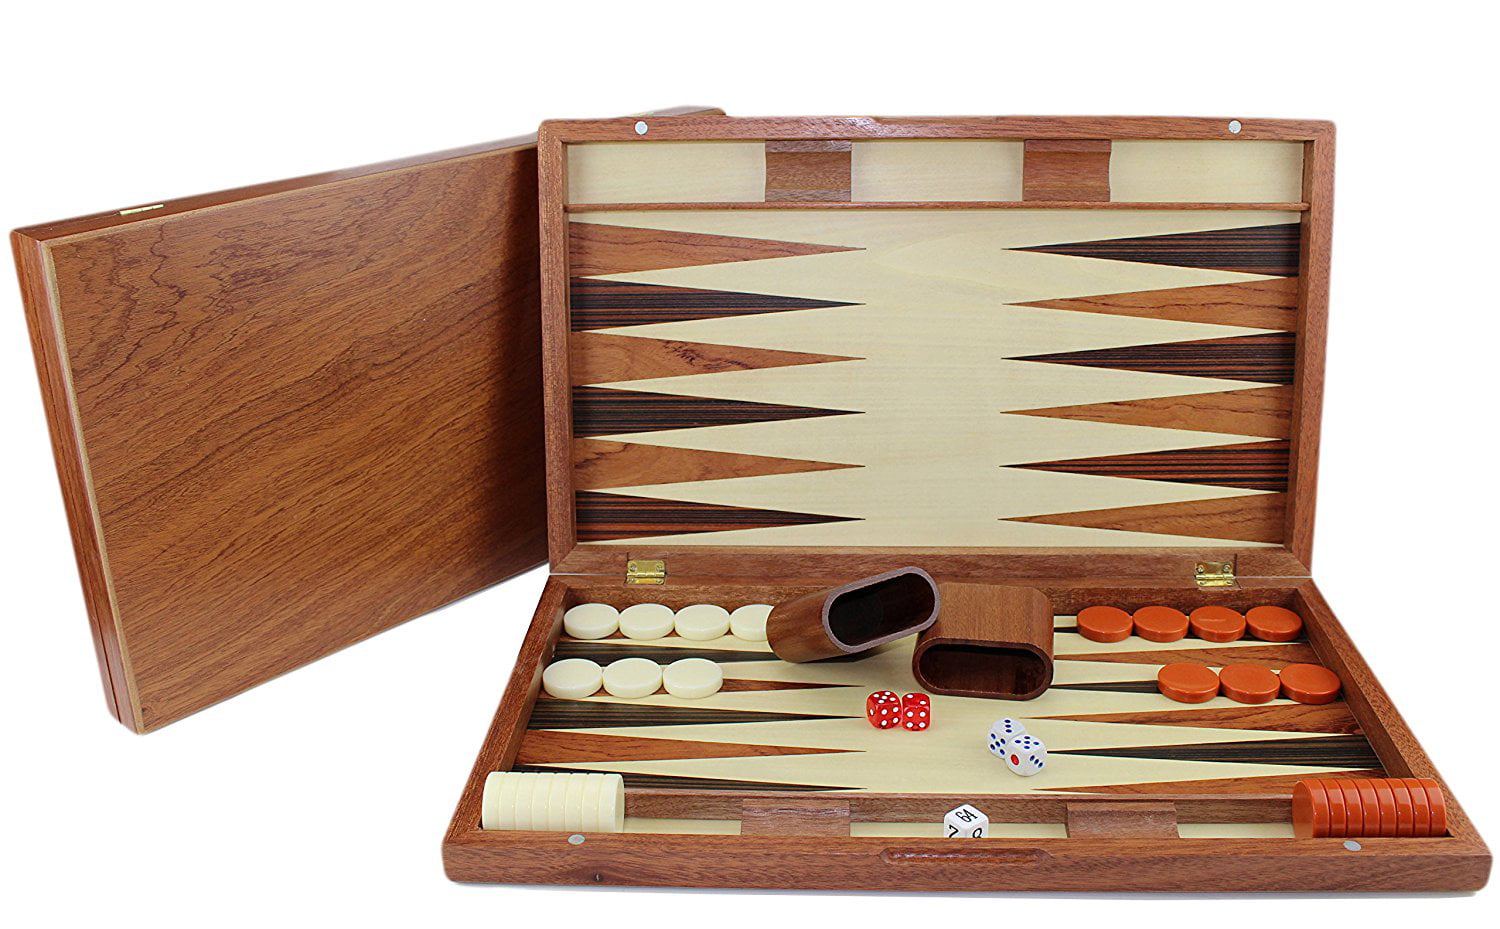 Backgammon Set Portable Leather Travel Folding Case Dice Cup Board Games 18"x22" 